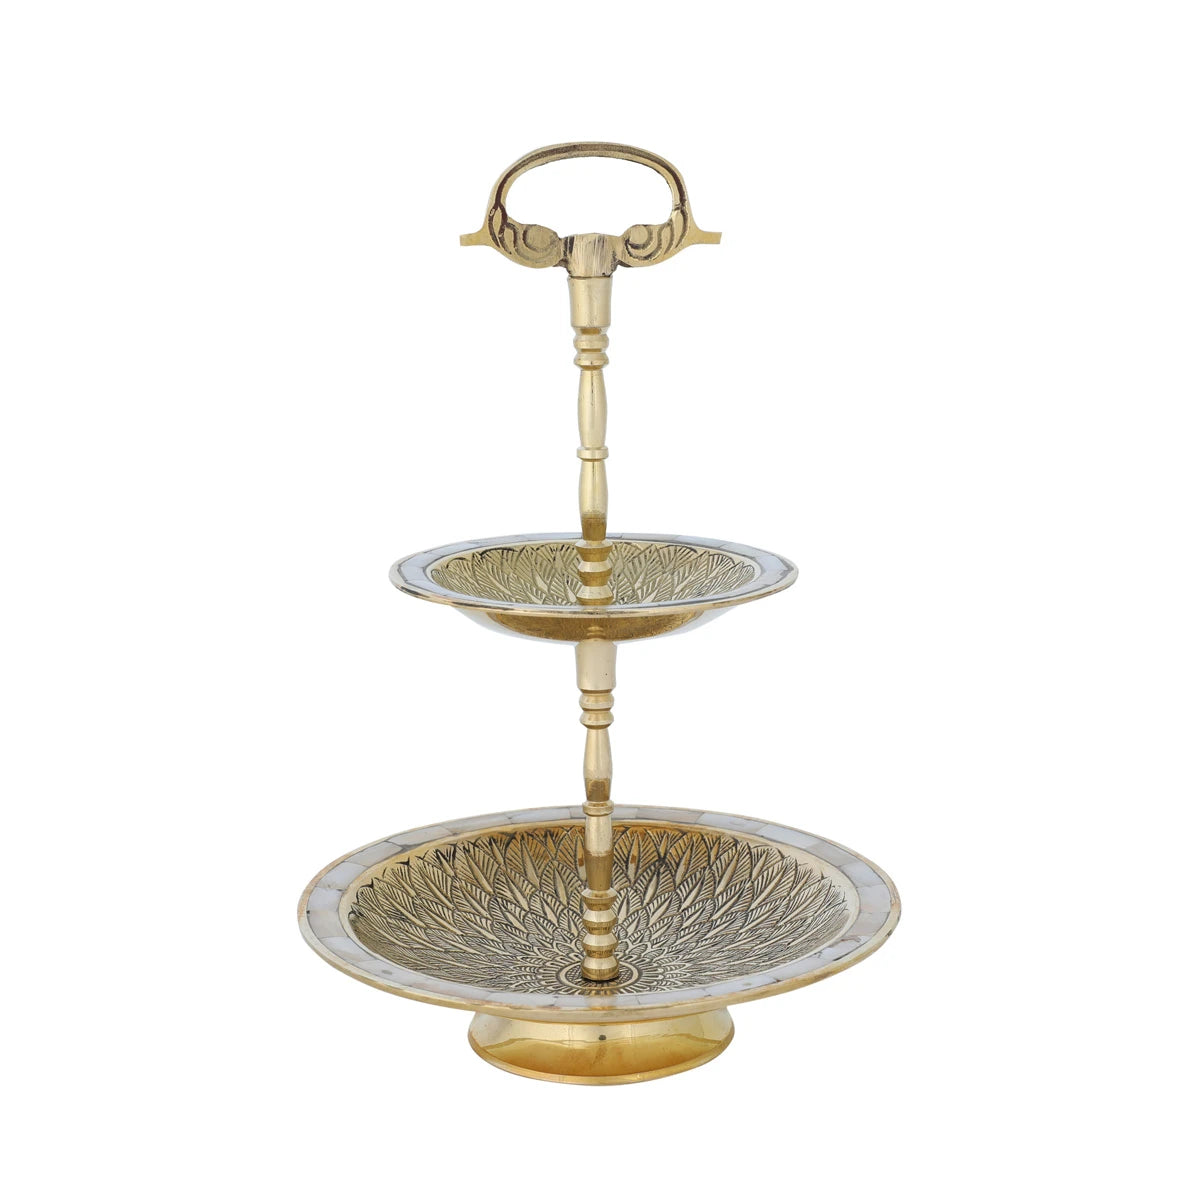 Front View of Solid Brass Fruit & Nut Stand - Gold 